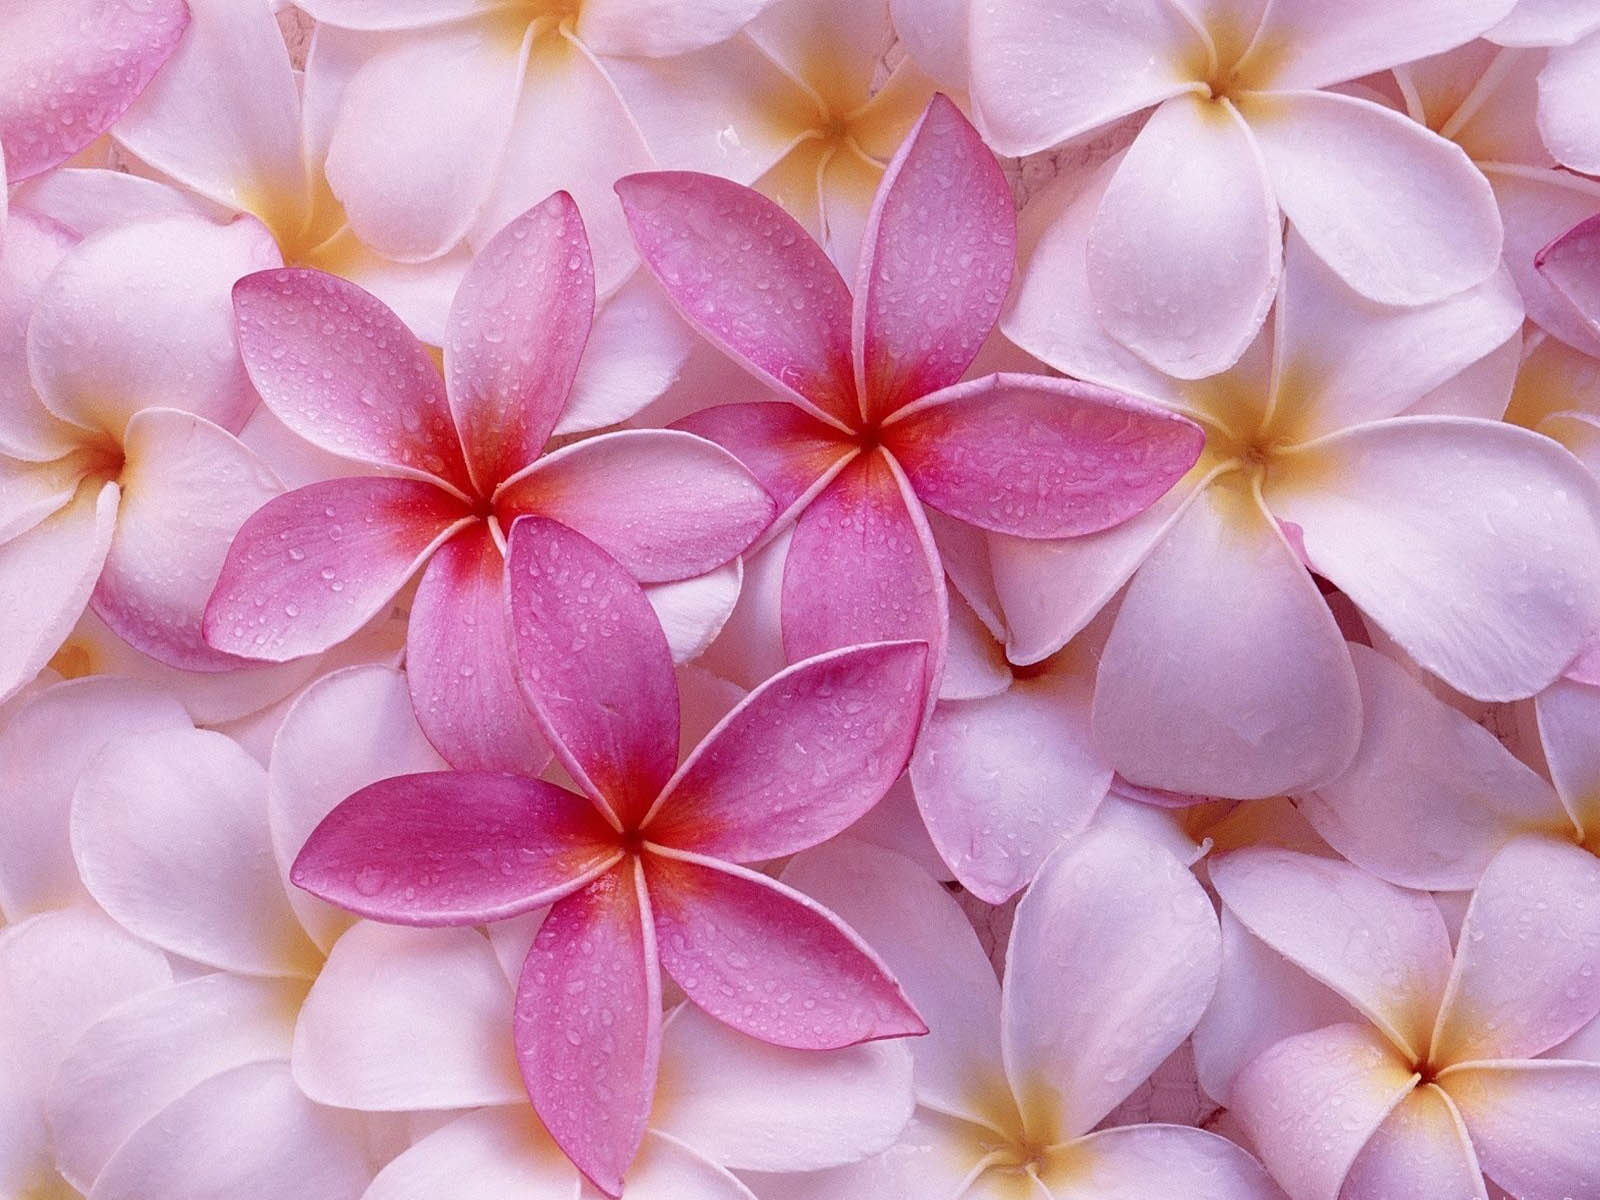  Flowers Wallpapers BackgroundsPhotos Images and Pictures for free